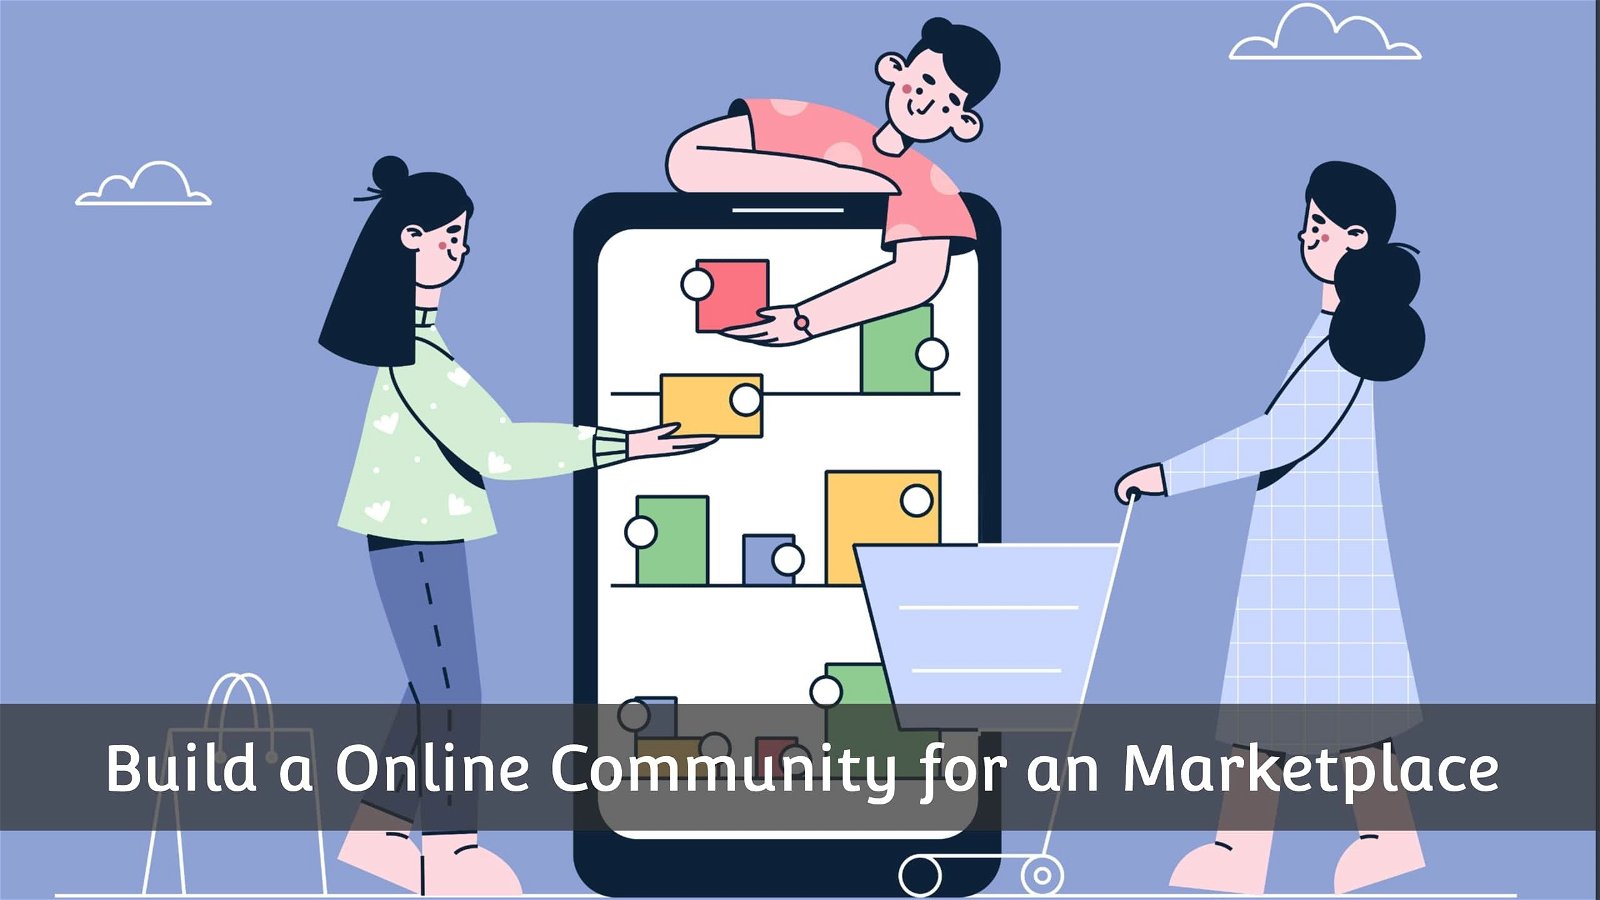 How to build a community for an online marketplace